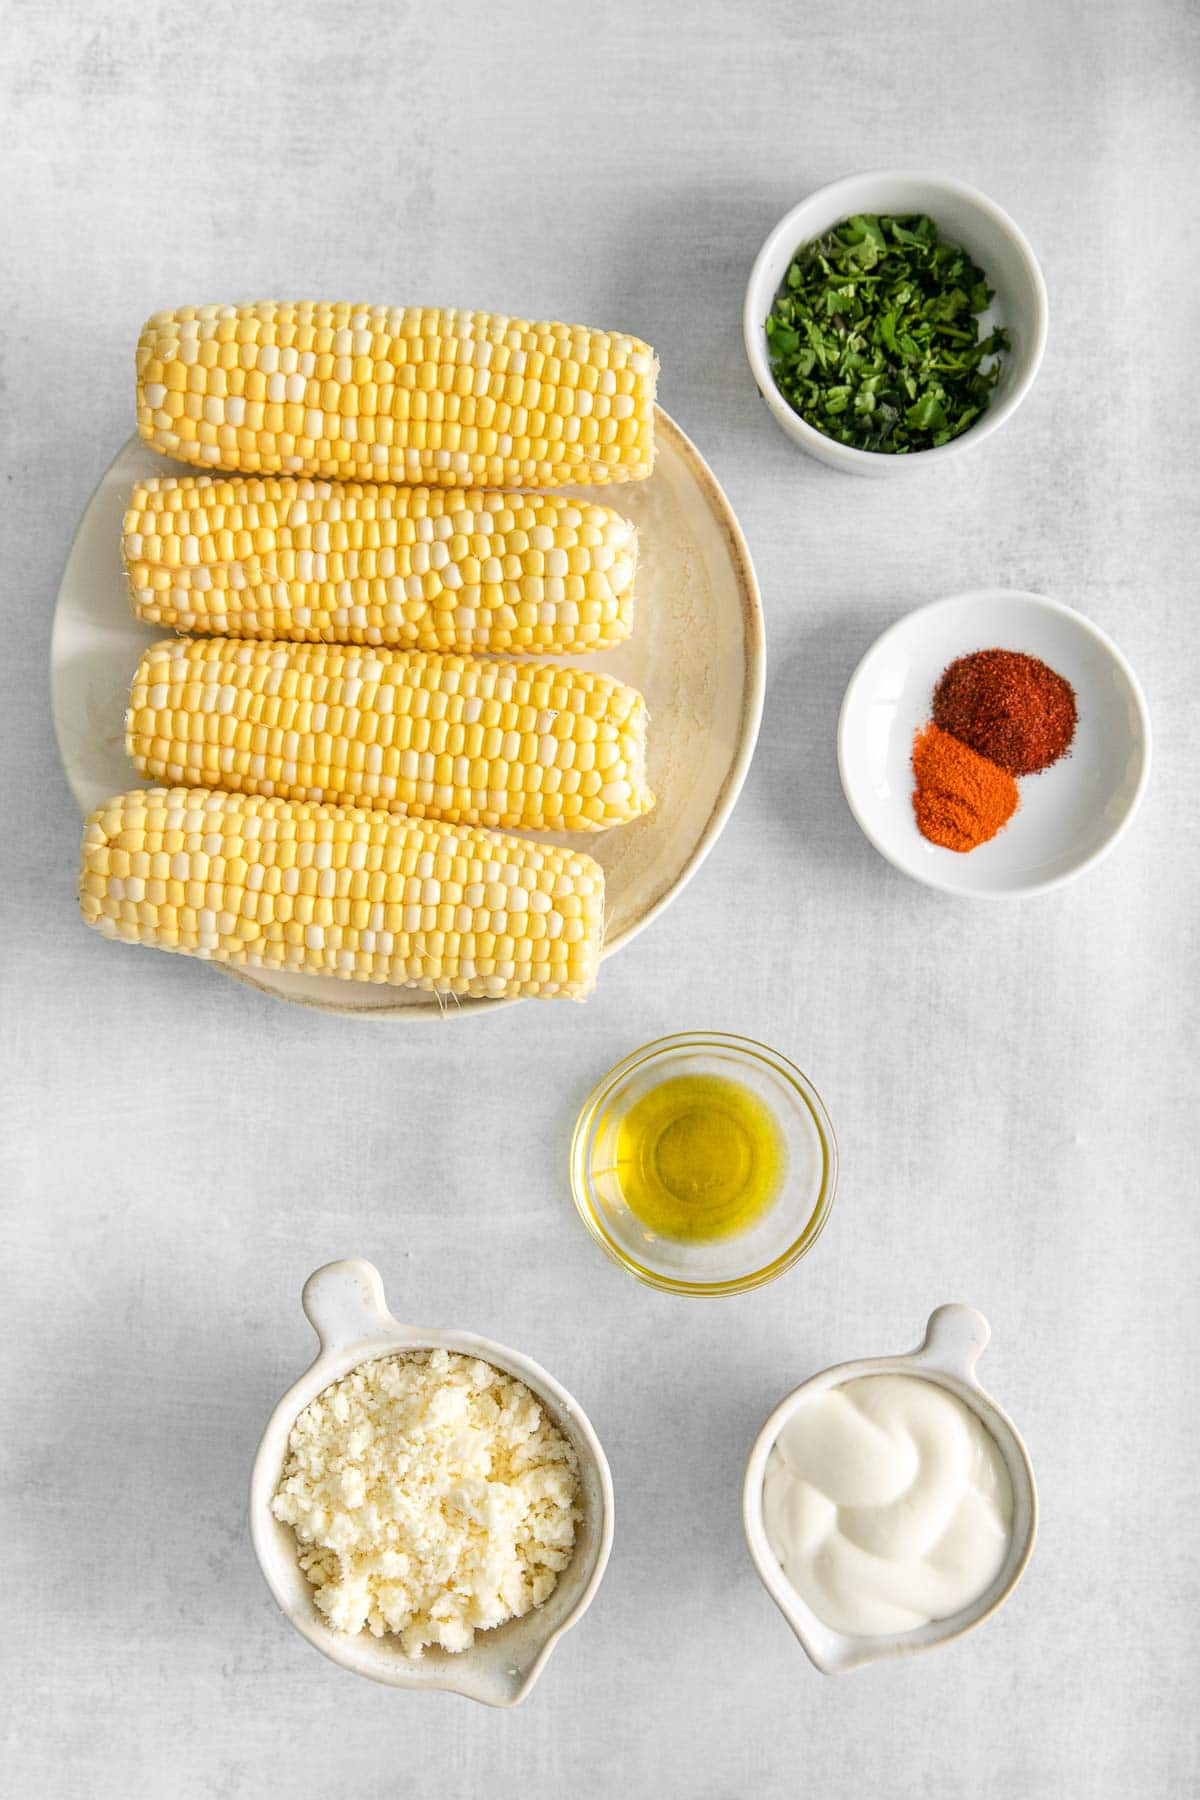 several white bowls with ingredients for mexican street corn dip - four corn cobs, crumbled cojito cheese, sour cream, chopped cilantro, olive oil and spices